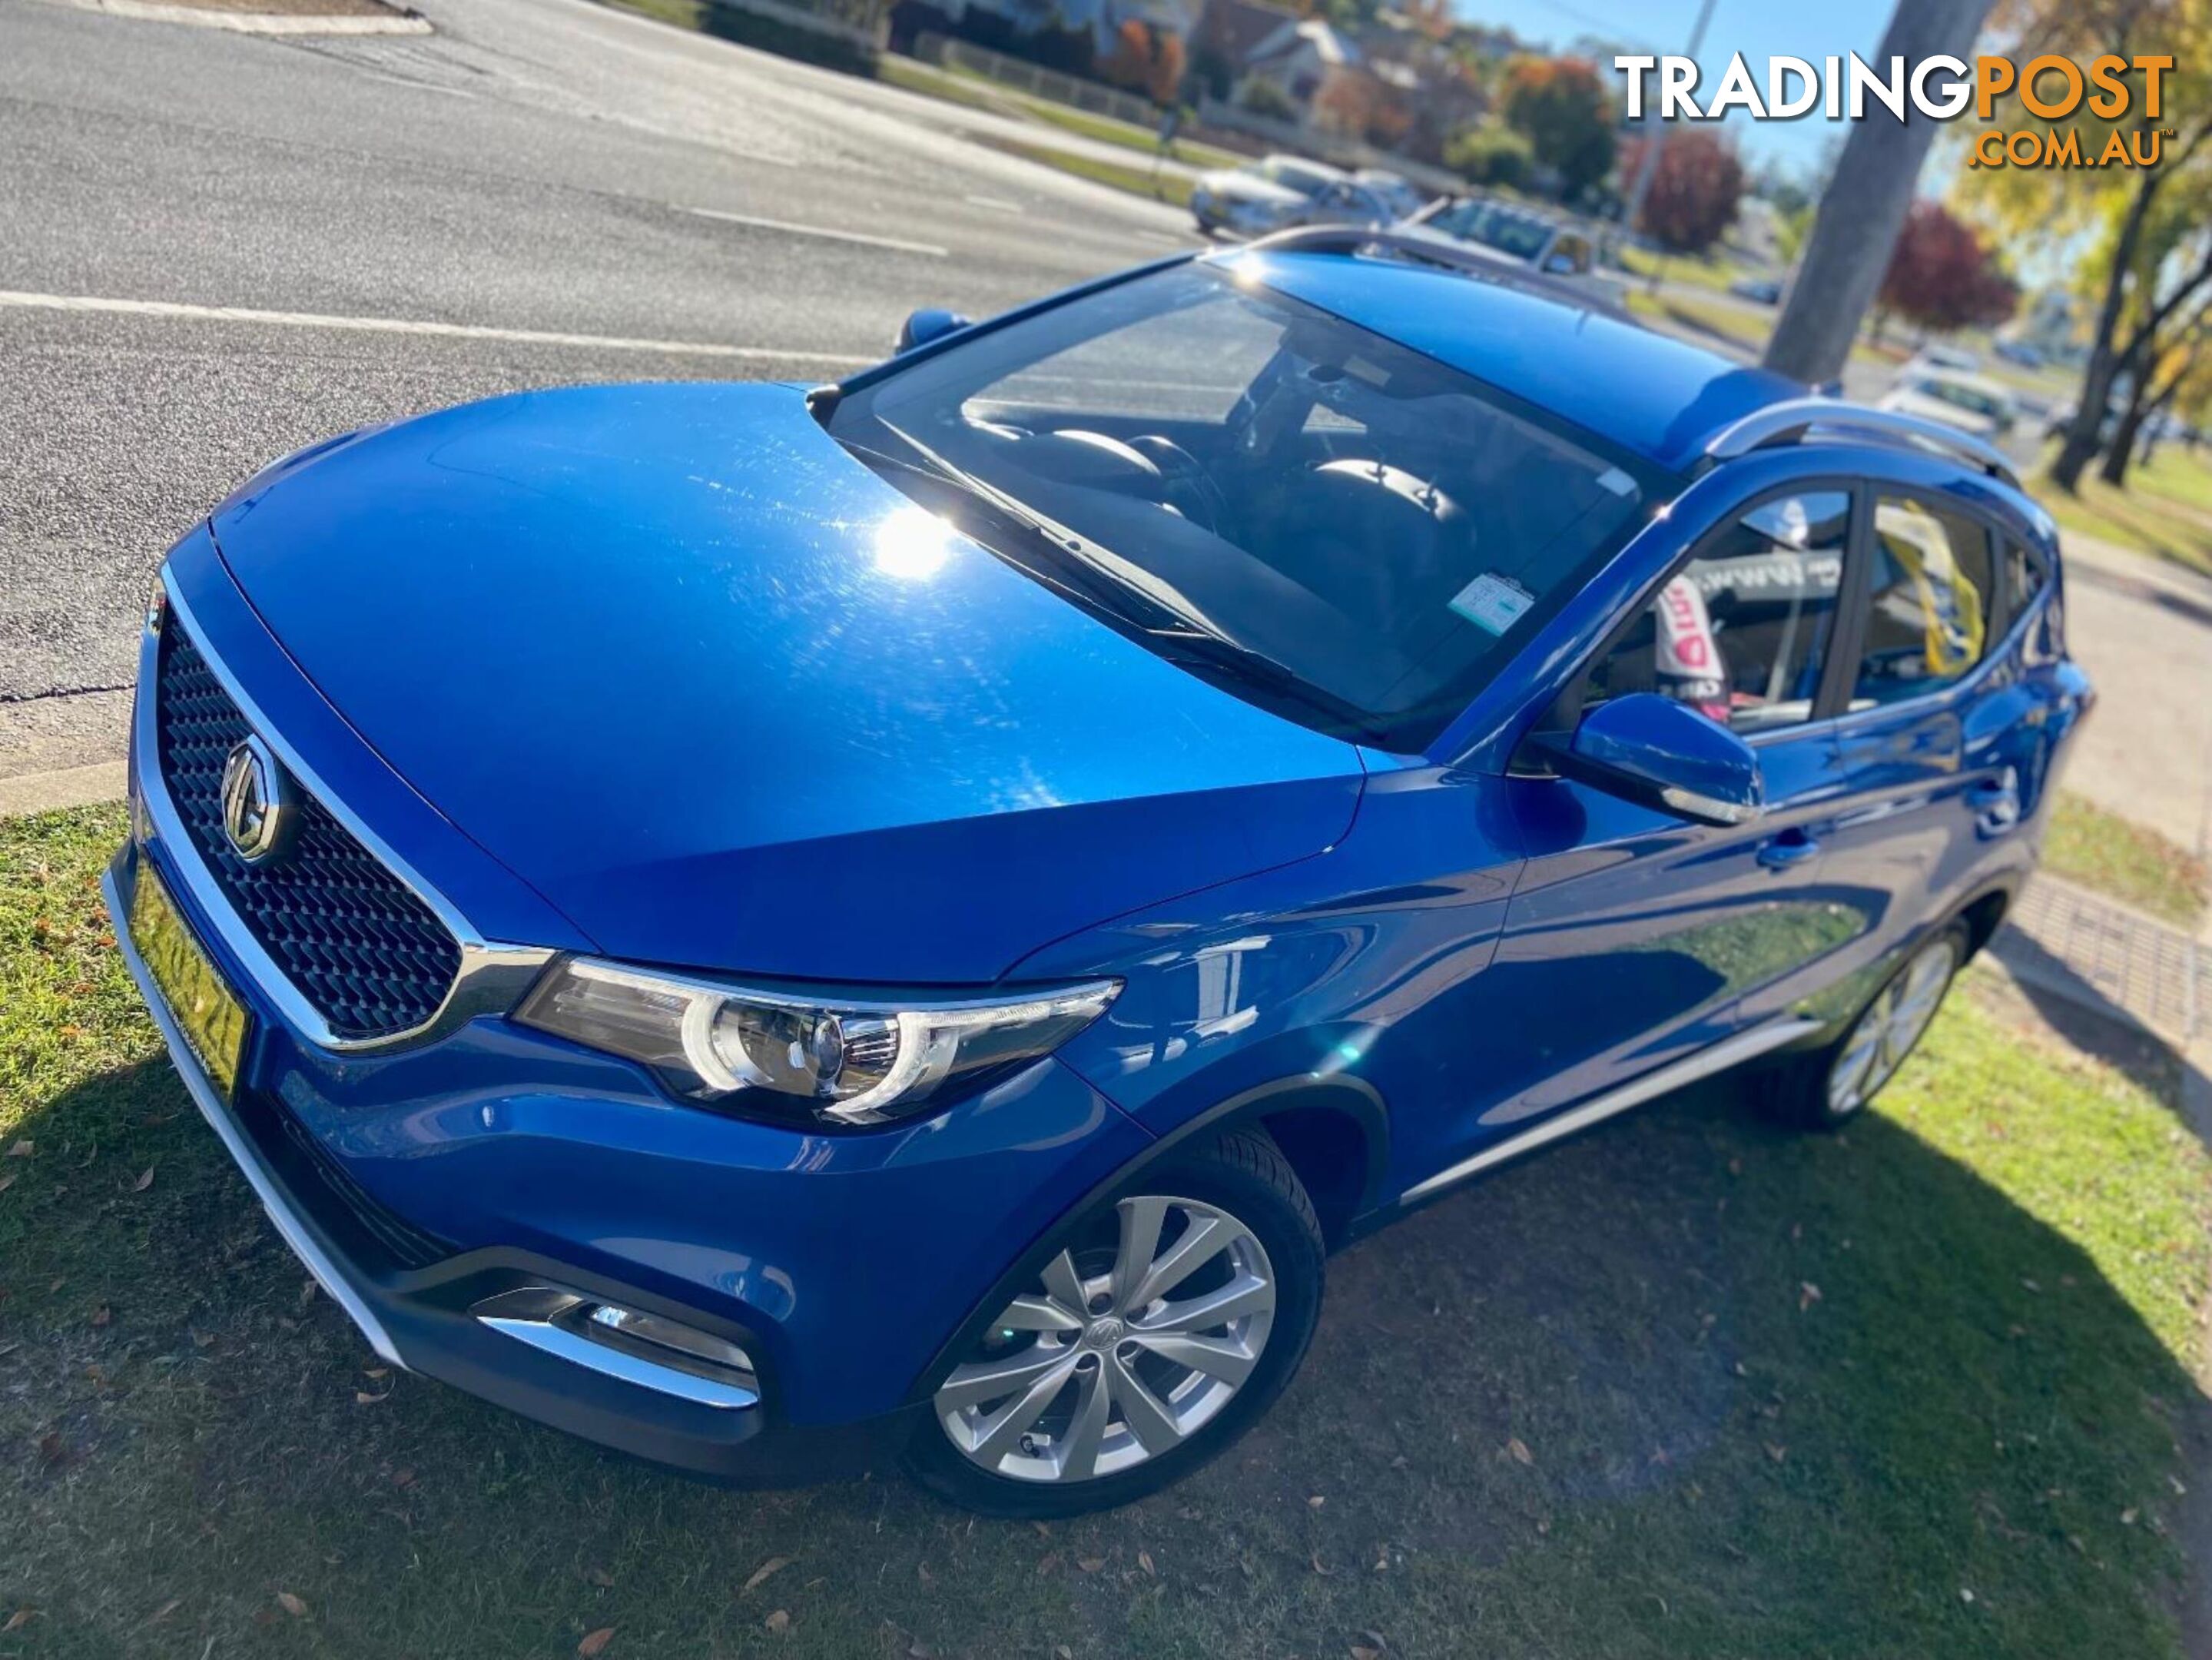 2020 MG ZS AZS1MY20 EXCITE WAGON